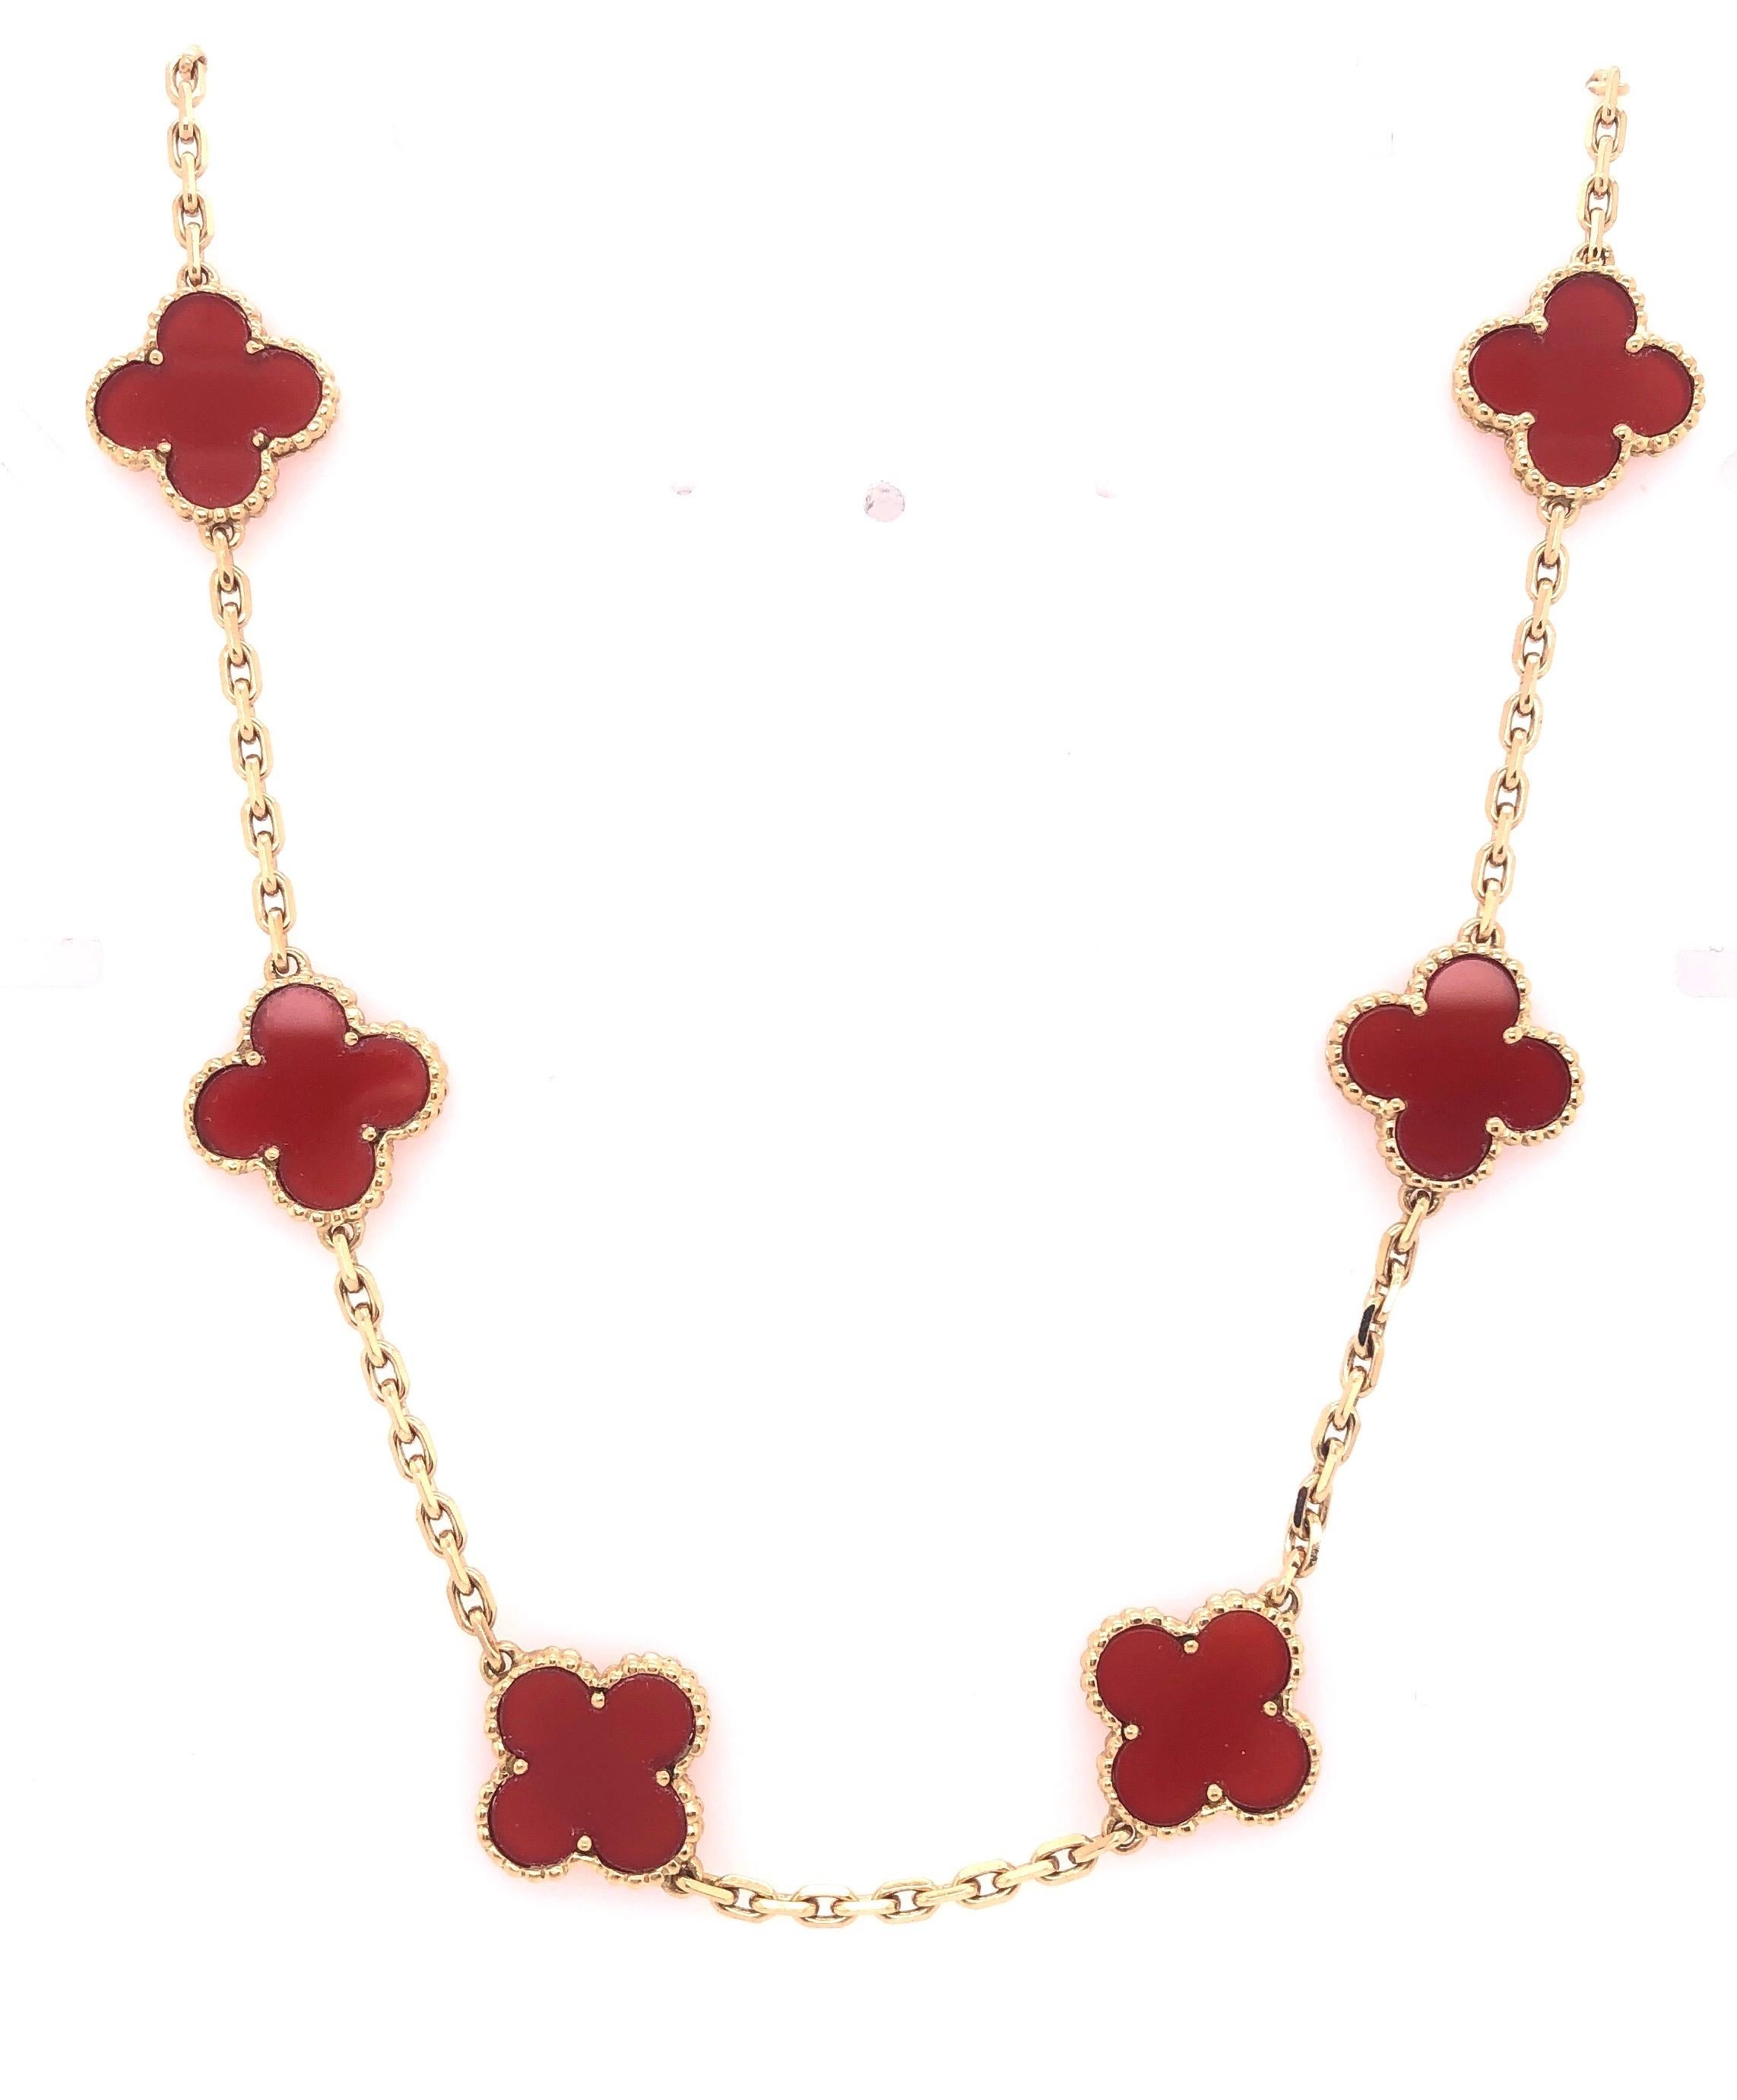 18Kt Yellow Gold Van Cleef & Arpels Vintage Alhambra Carnelian 10 Motif Necklace. Bearing VCA 750 with Serial BL143959 16.5 inch Chain. This necklace is in magnificent condition and has been near never worn. 
